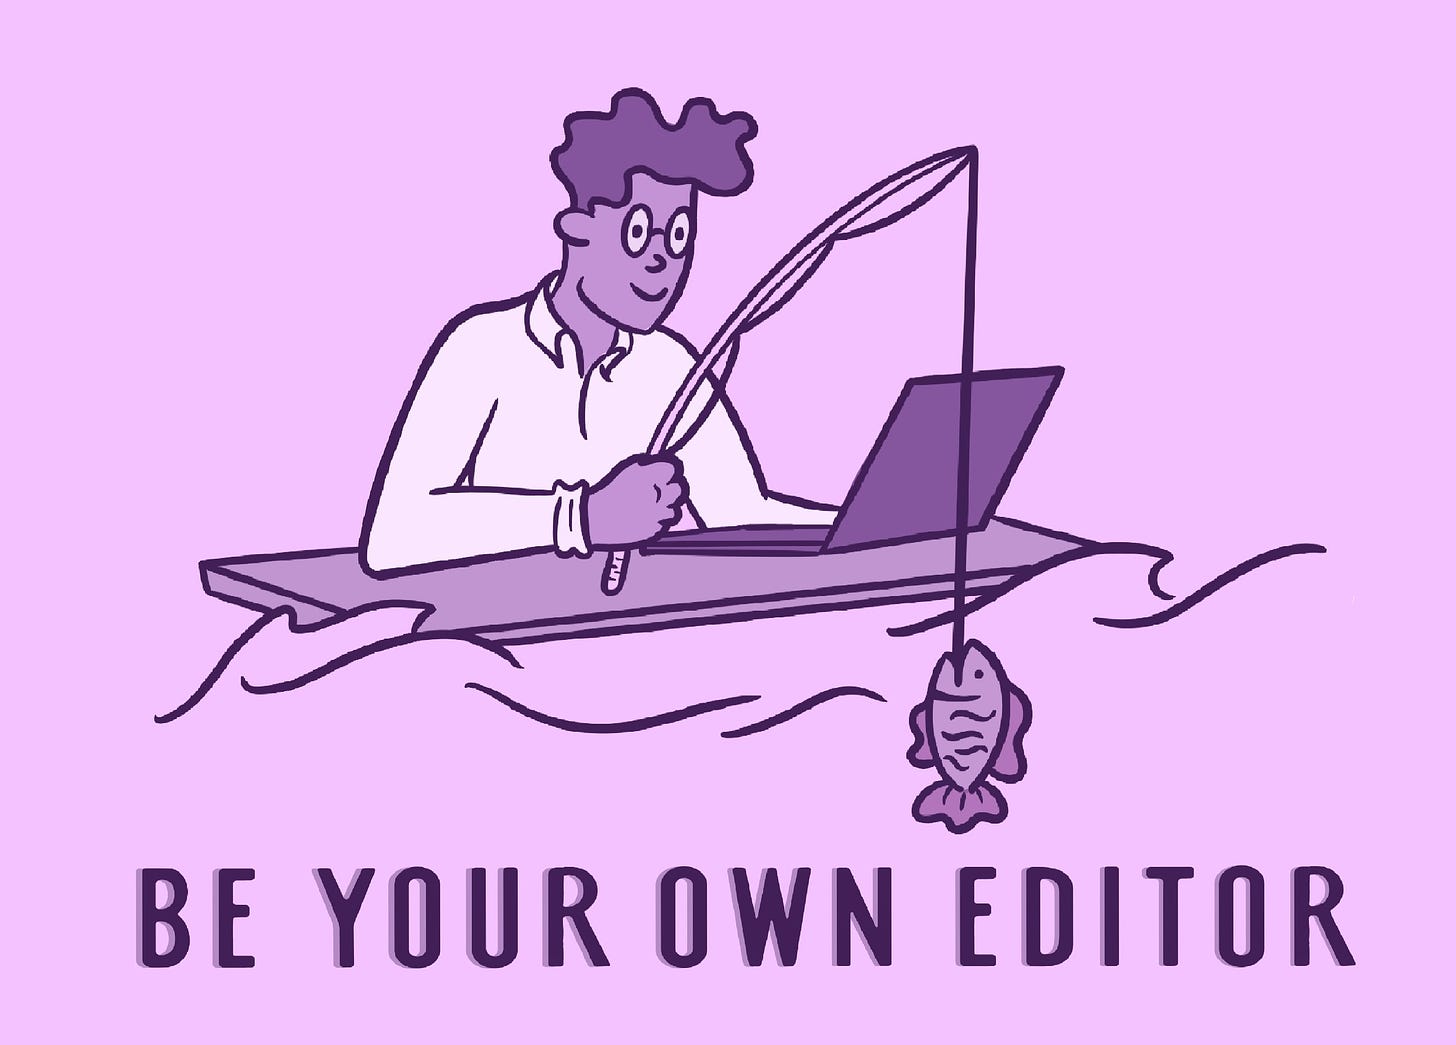 Link to: Be Your Own Editor workshop home page